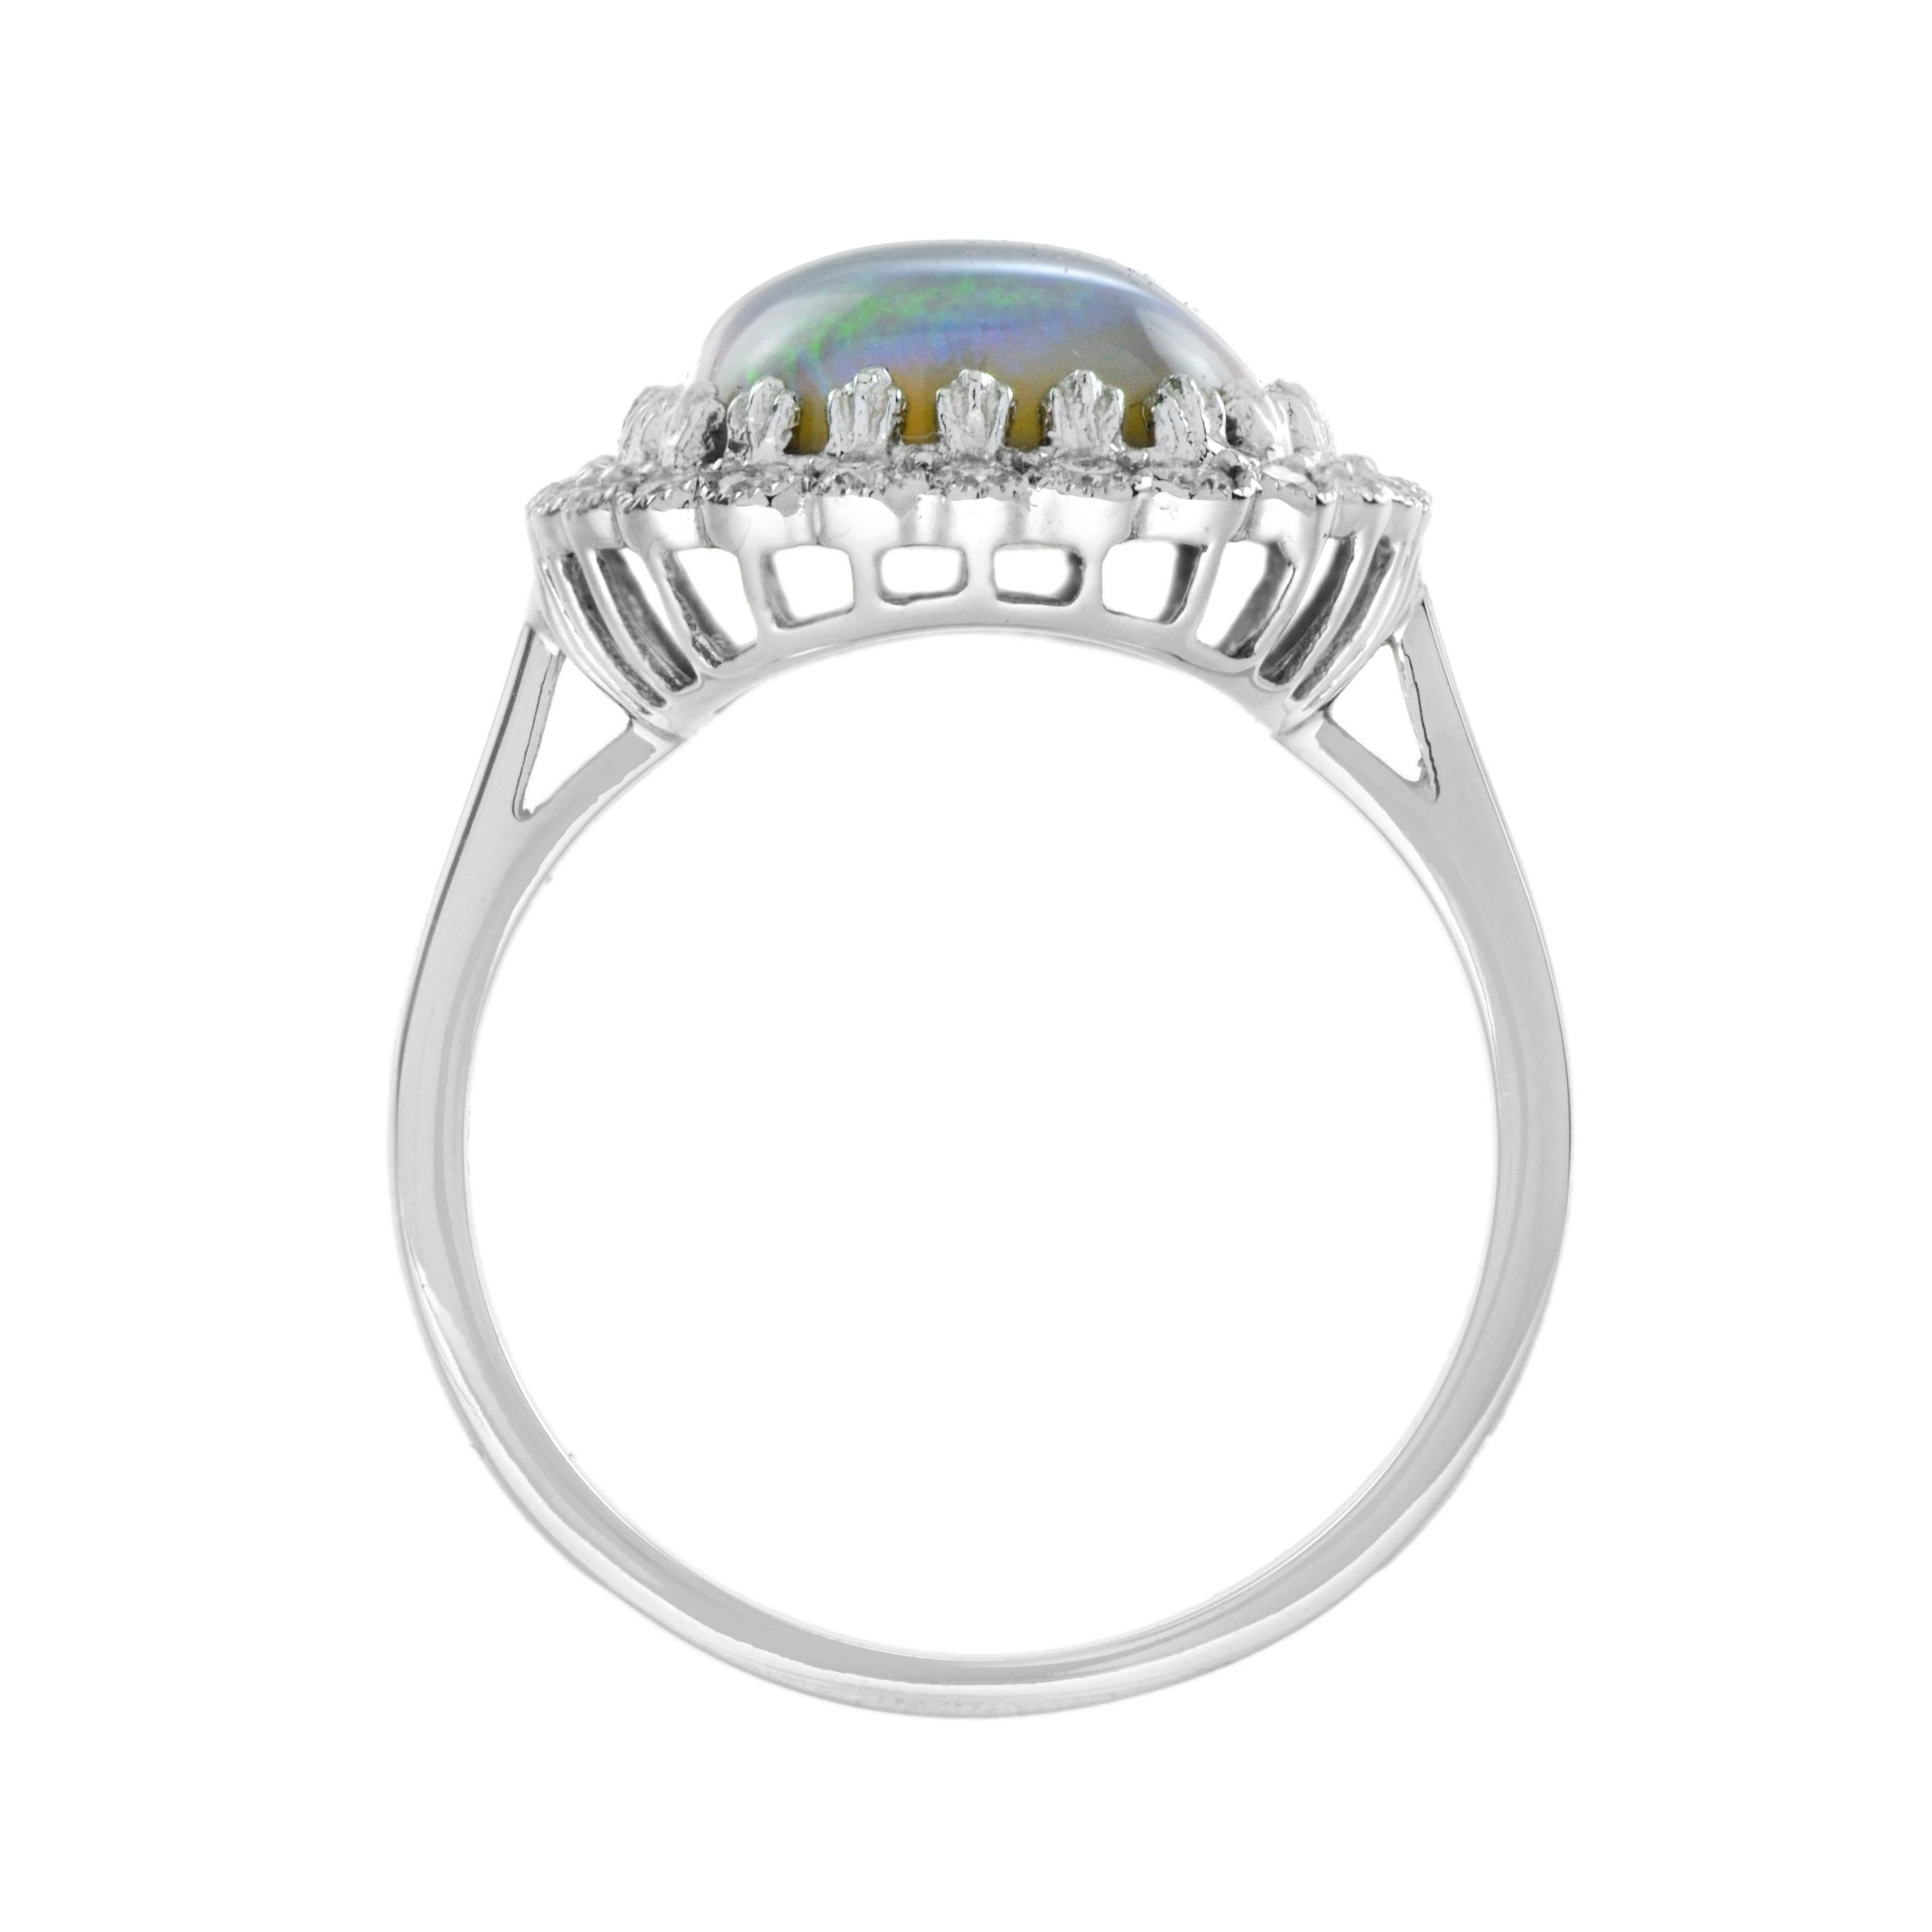 Women's 5.2 Ct. Crystal Australian Opal and Diamond Halo Ring in 18K White Gold For Sale